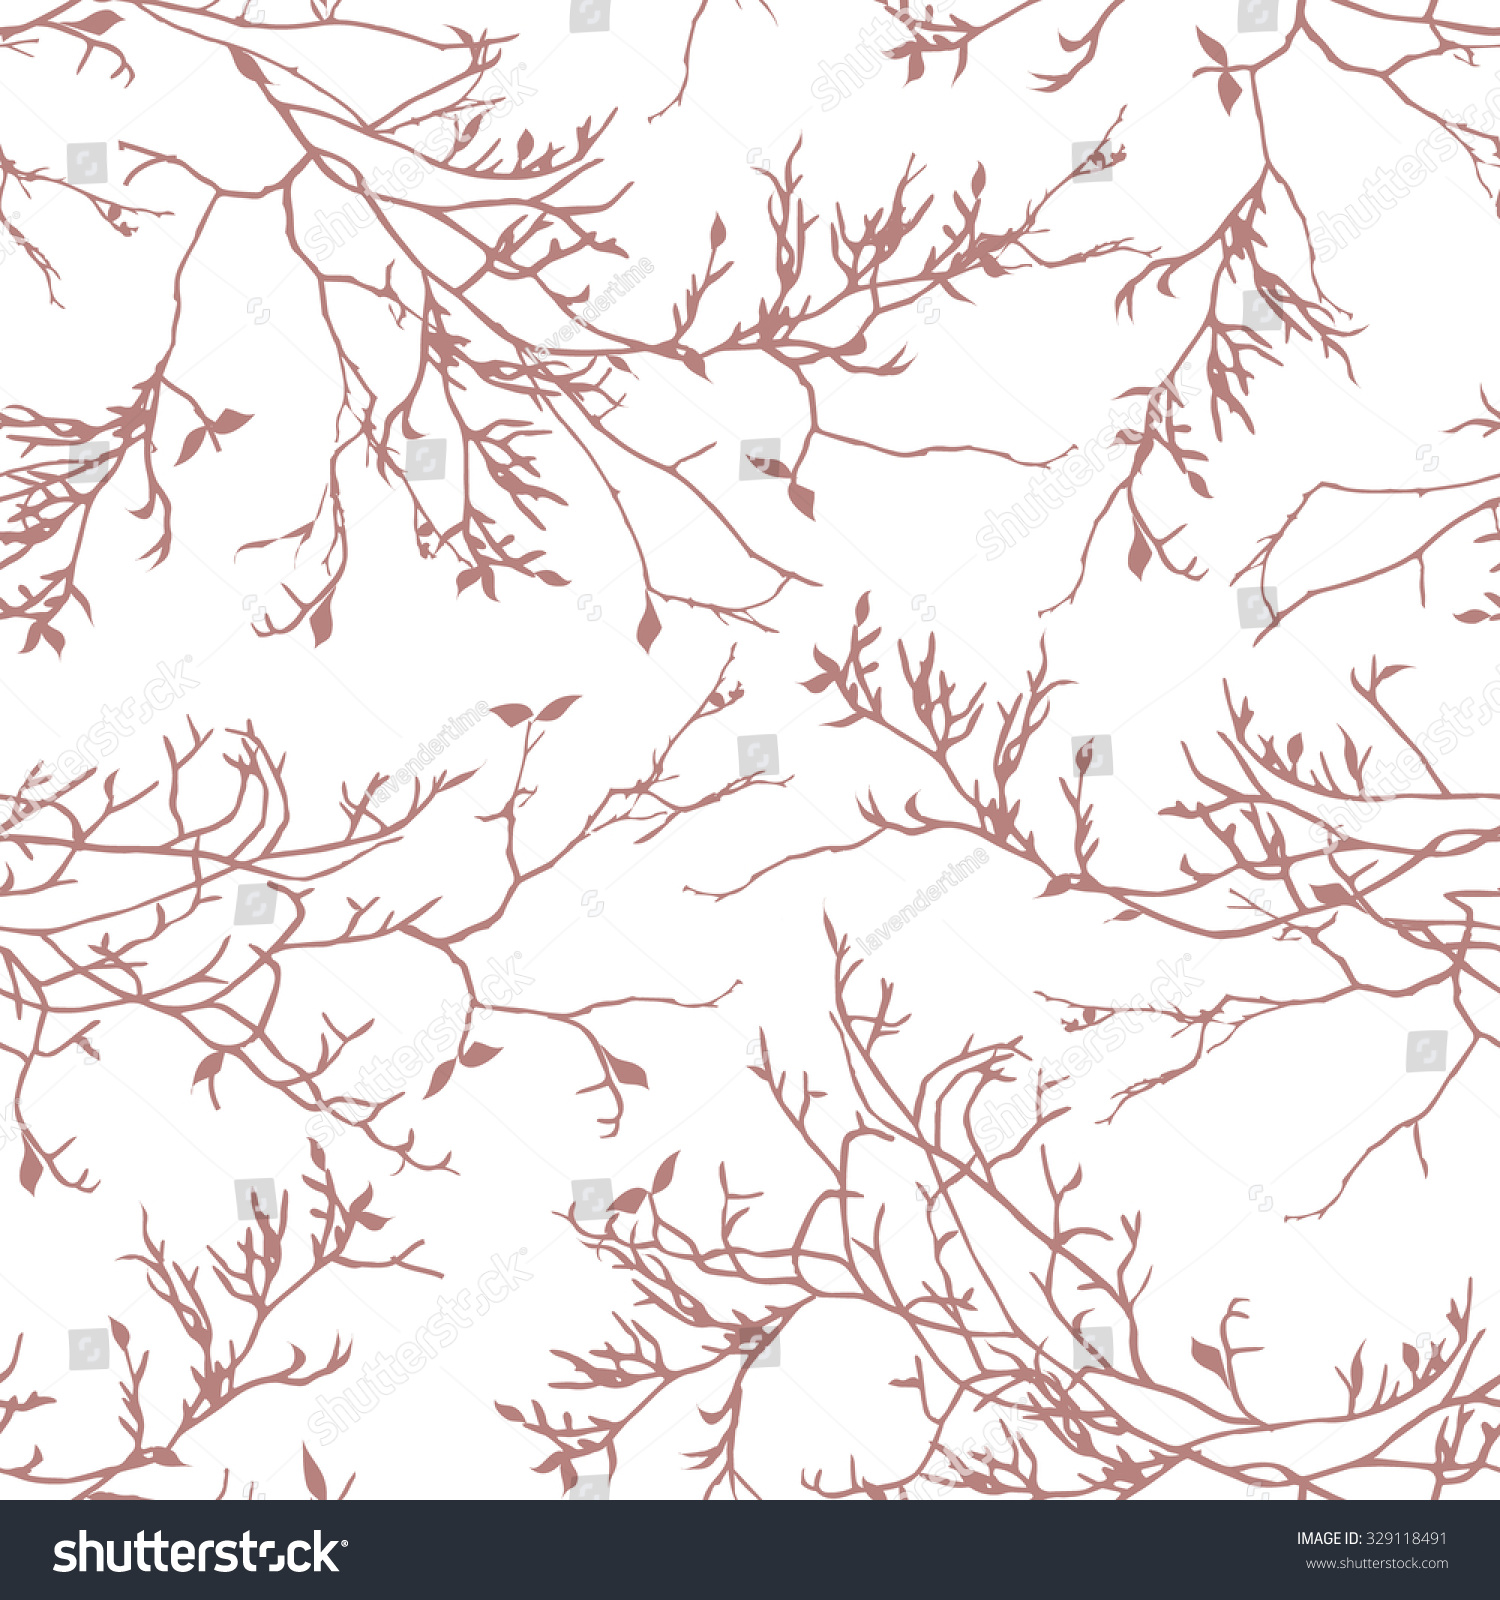 Brown Bare Tree Branches Seamless Vector Stock Vector 329118491 ...